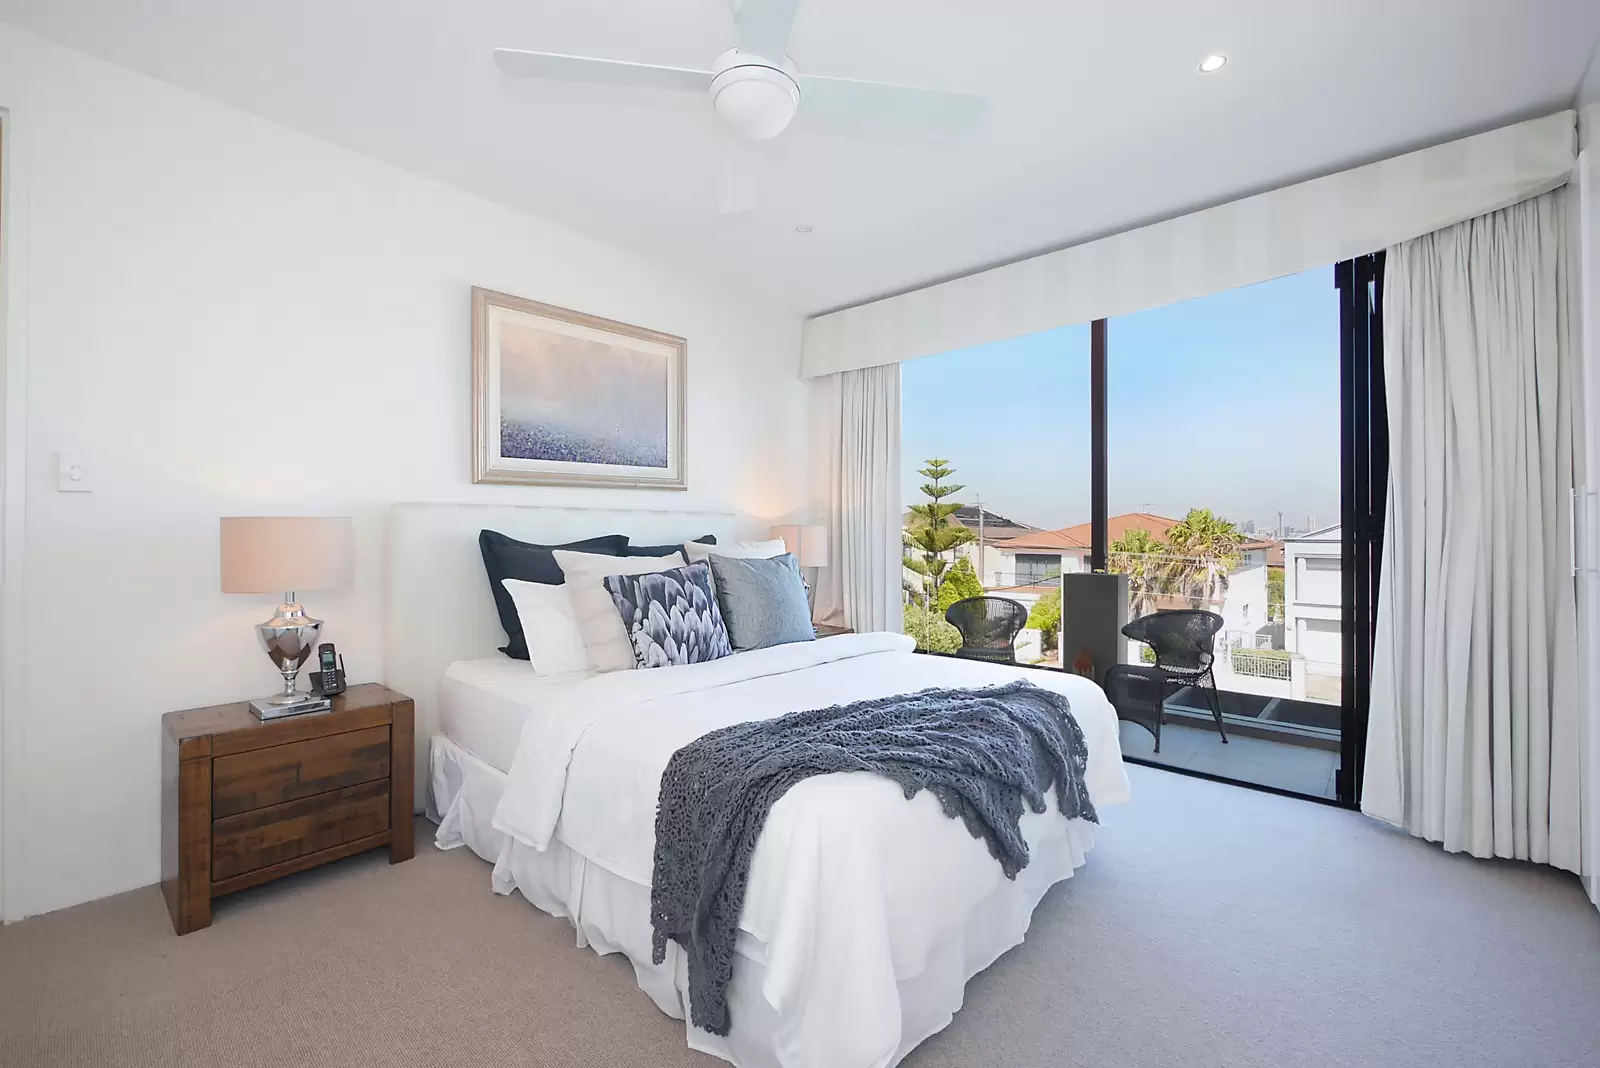 Photo #10: 18a Napier Street, Dover Heights - Sold by Sydney Sotheby's International Realty